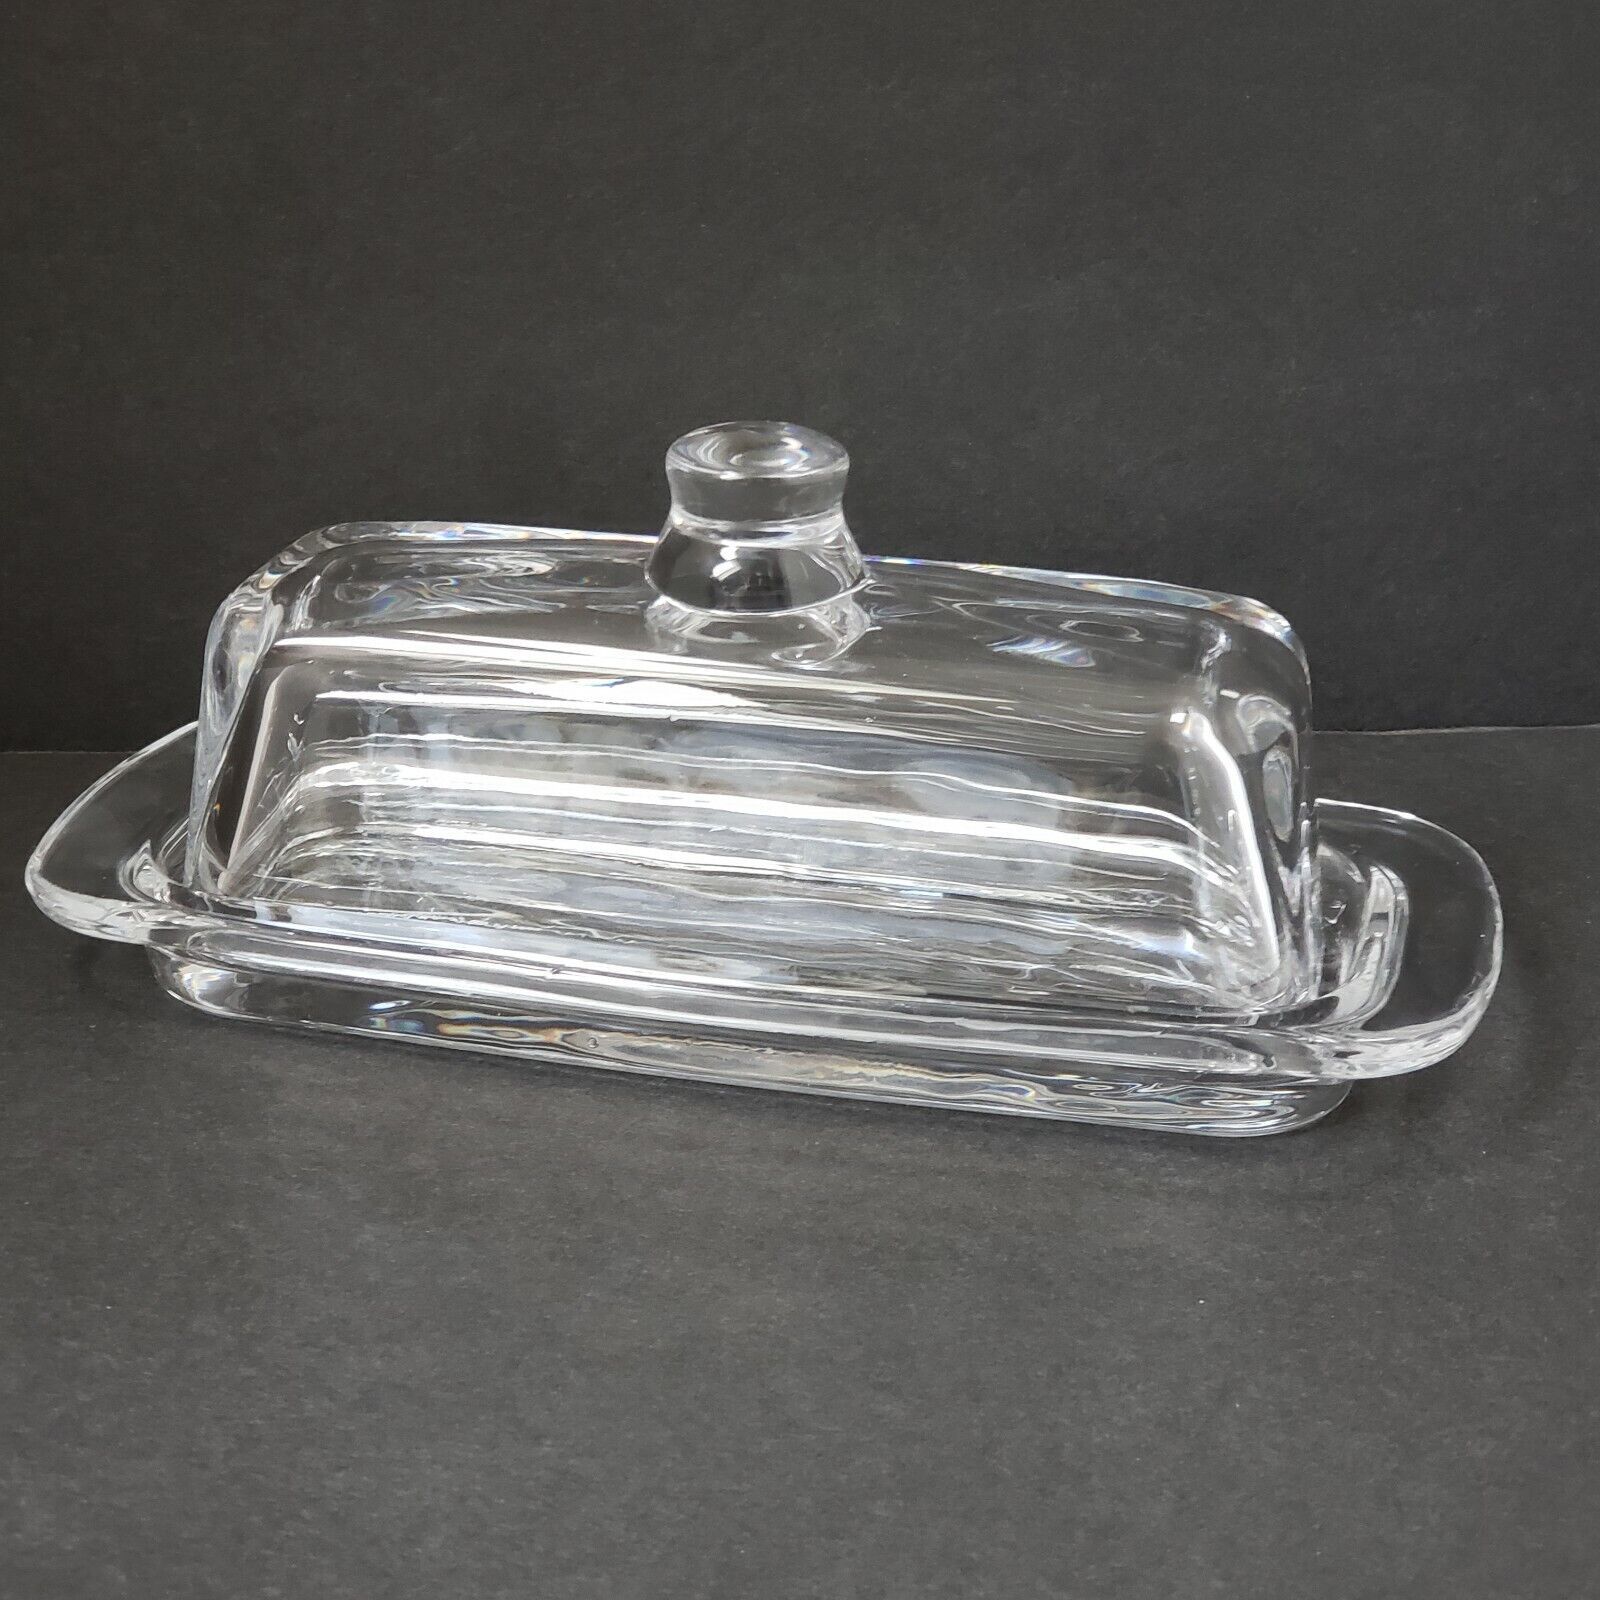 Primary image for Royal Art Clear Glass Covered Butter Dish